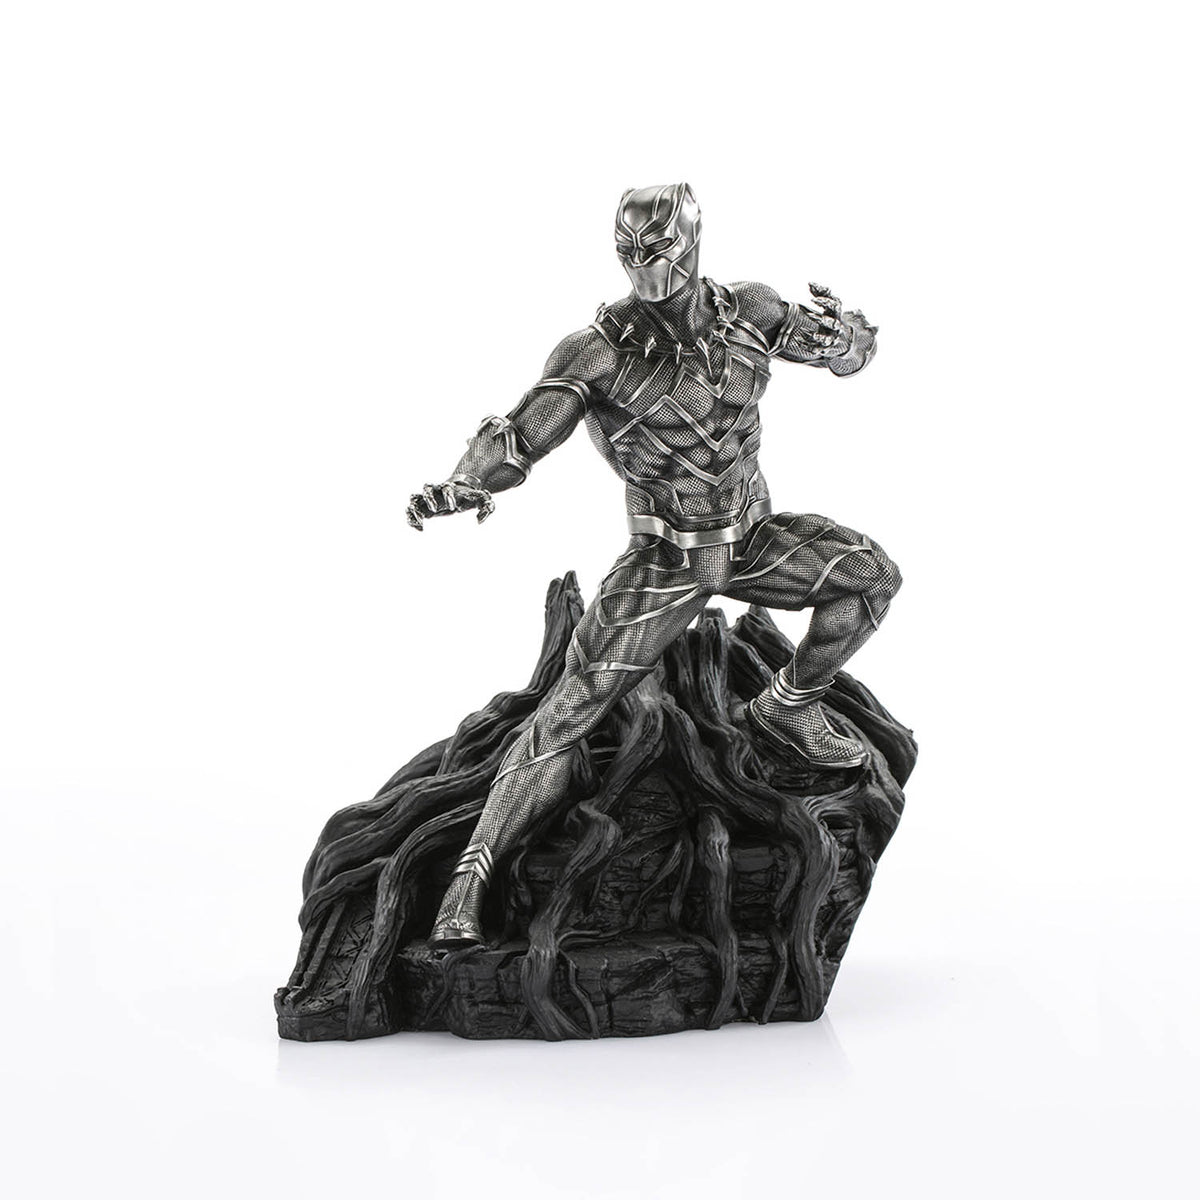 Limited Edition Black Panther Guardian Figurine (pre-order)